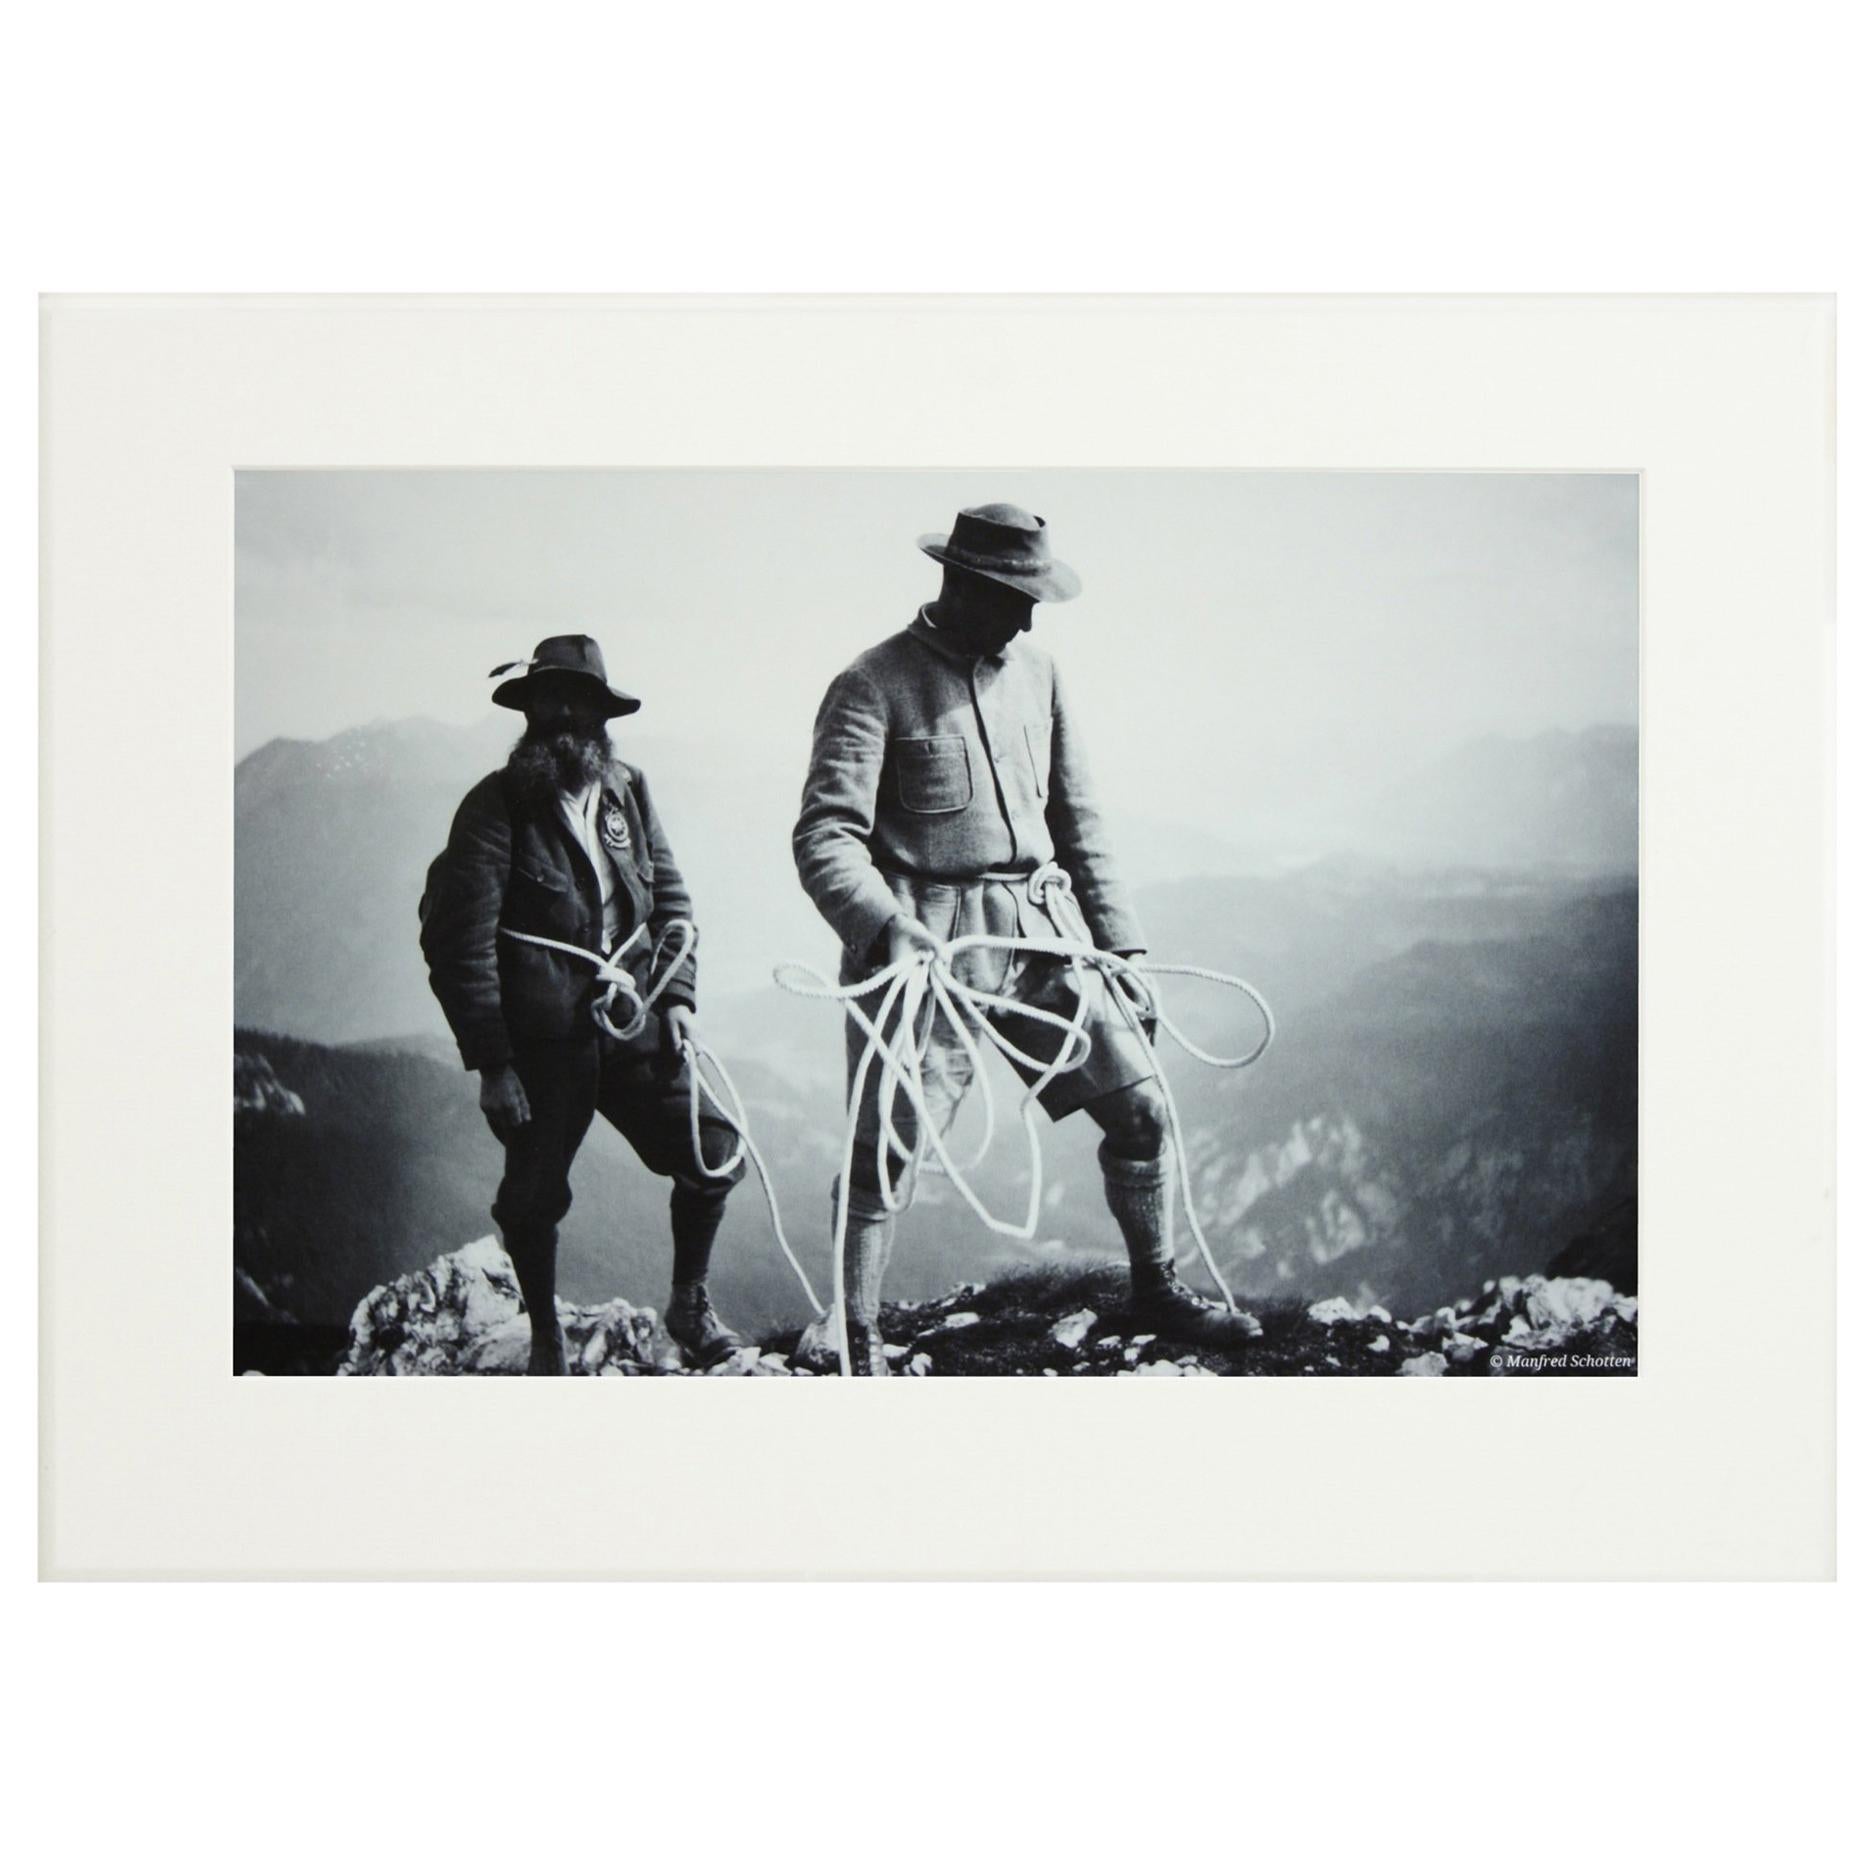 Alpine Ski Photograph, 'SAFETY FIRST' Taken from Original 1930s Photograph For Sale